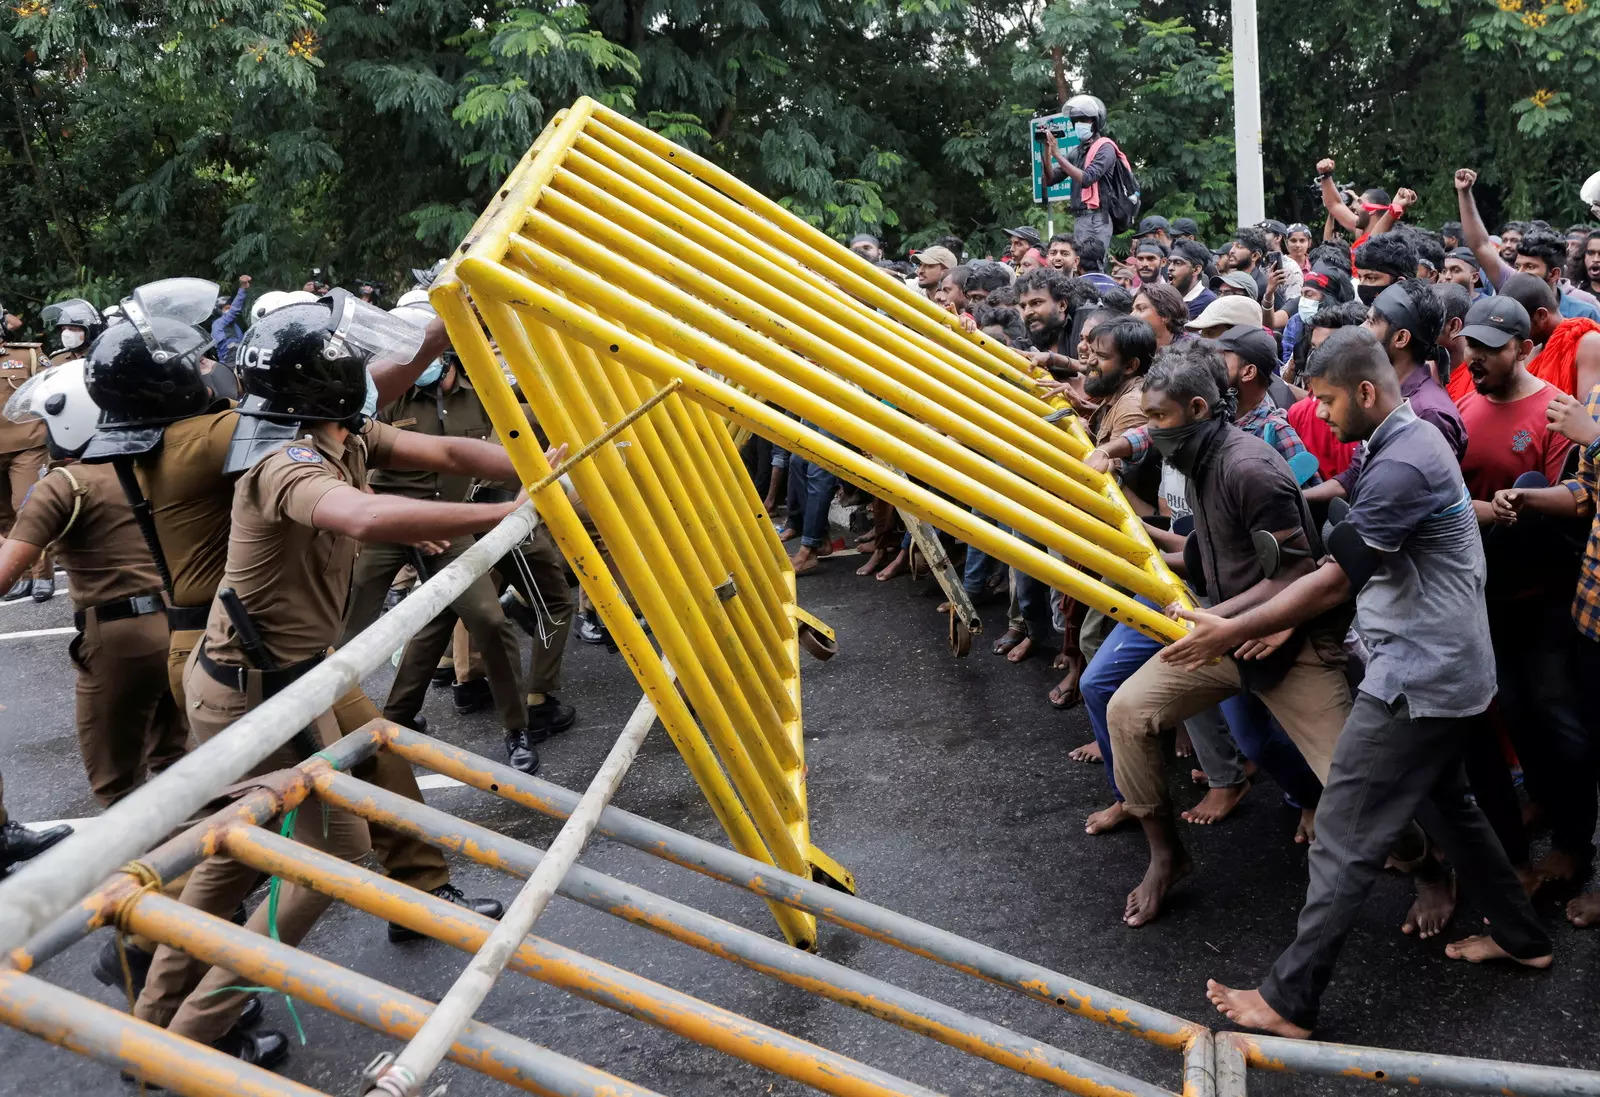 Demonstrators pull down metal barriers as they try to enter the main road towards the parliament during a protest against Sri Lankan President Gotabaya Rajapaksa near the parliament.